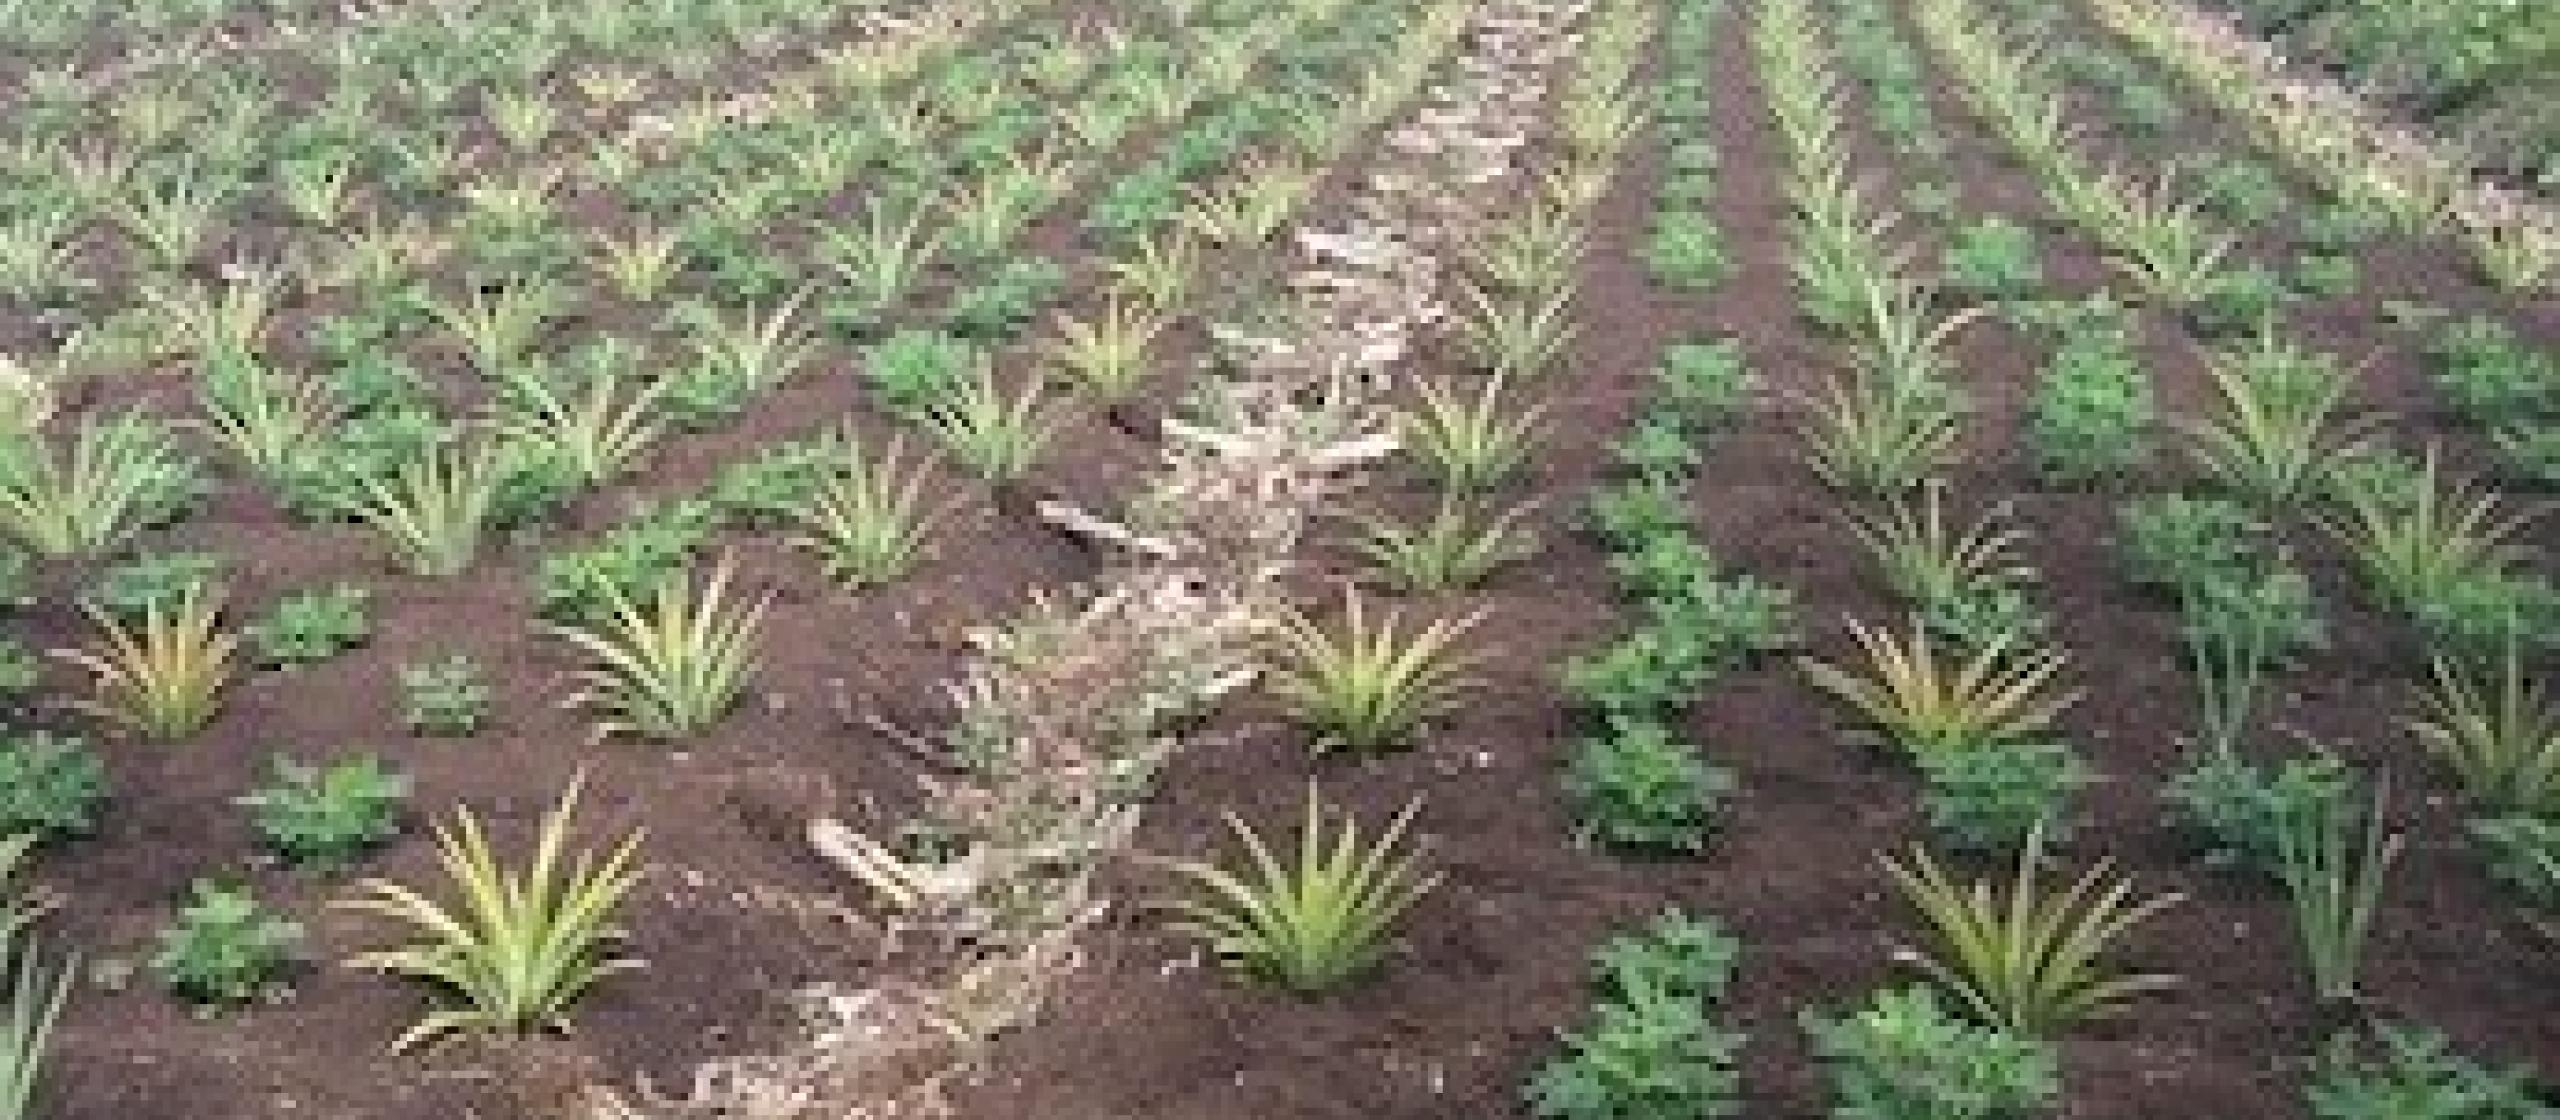 A field of pineapples